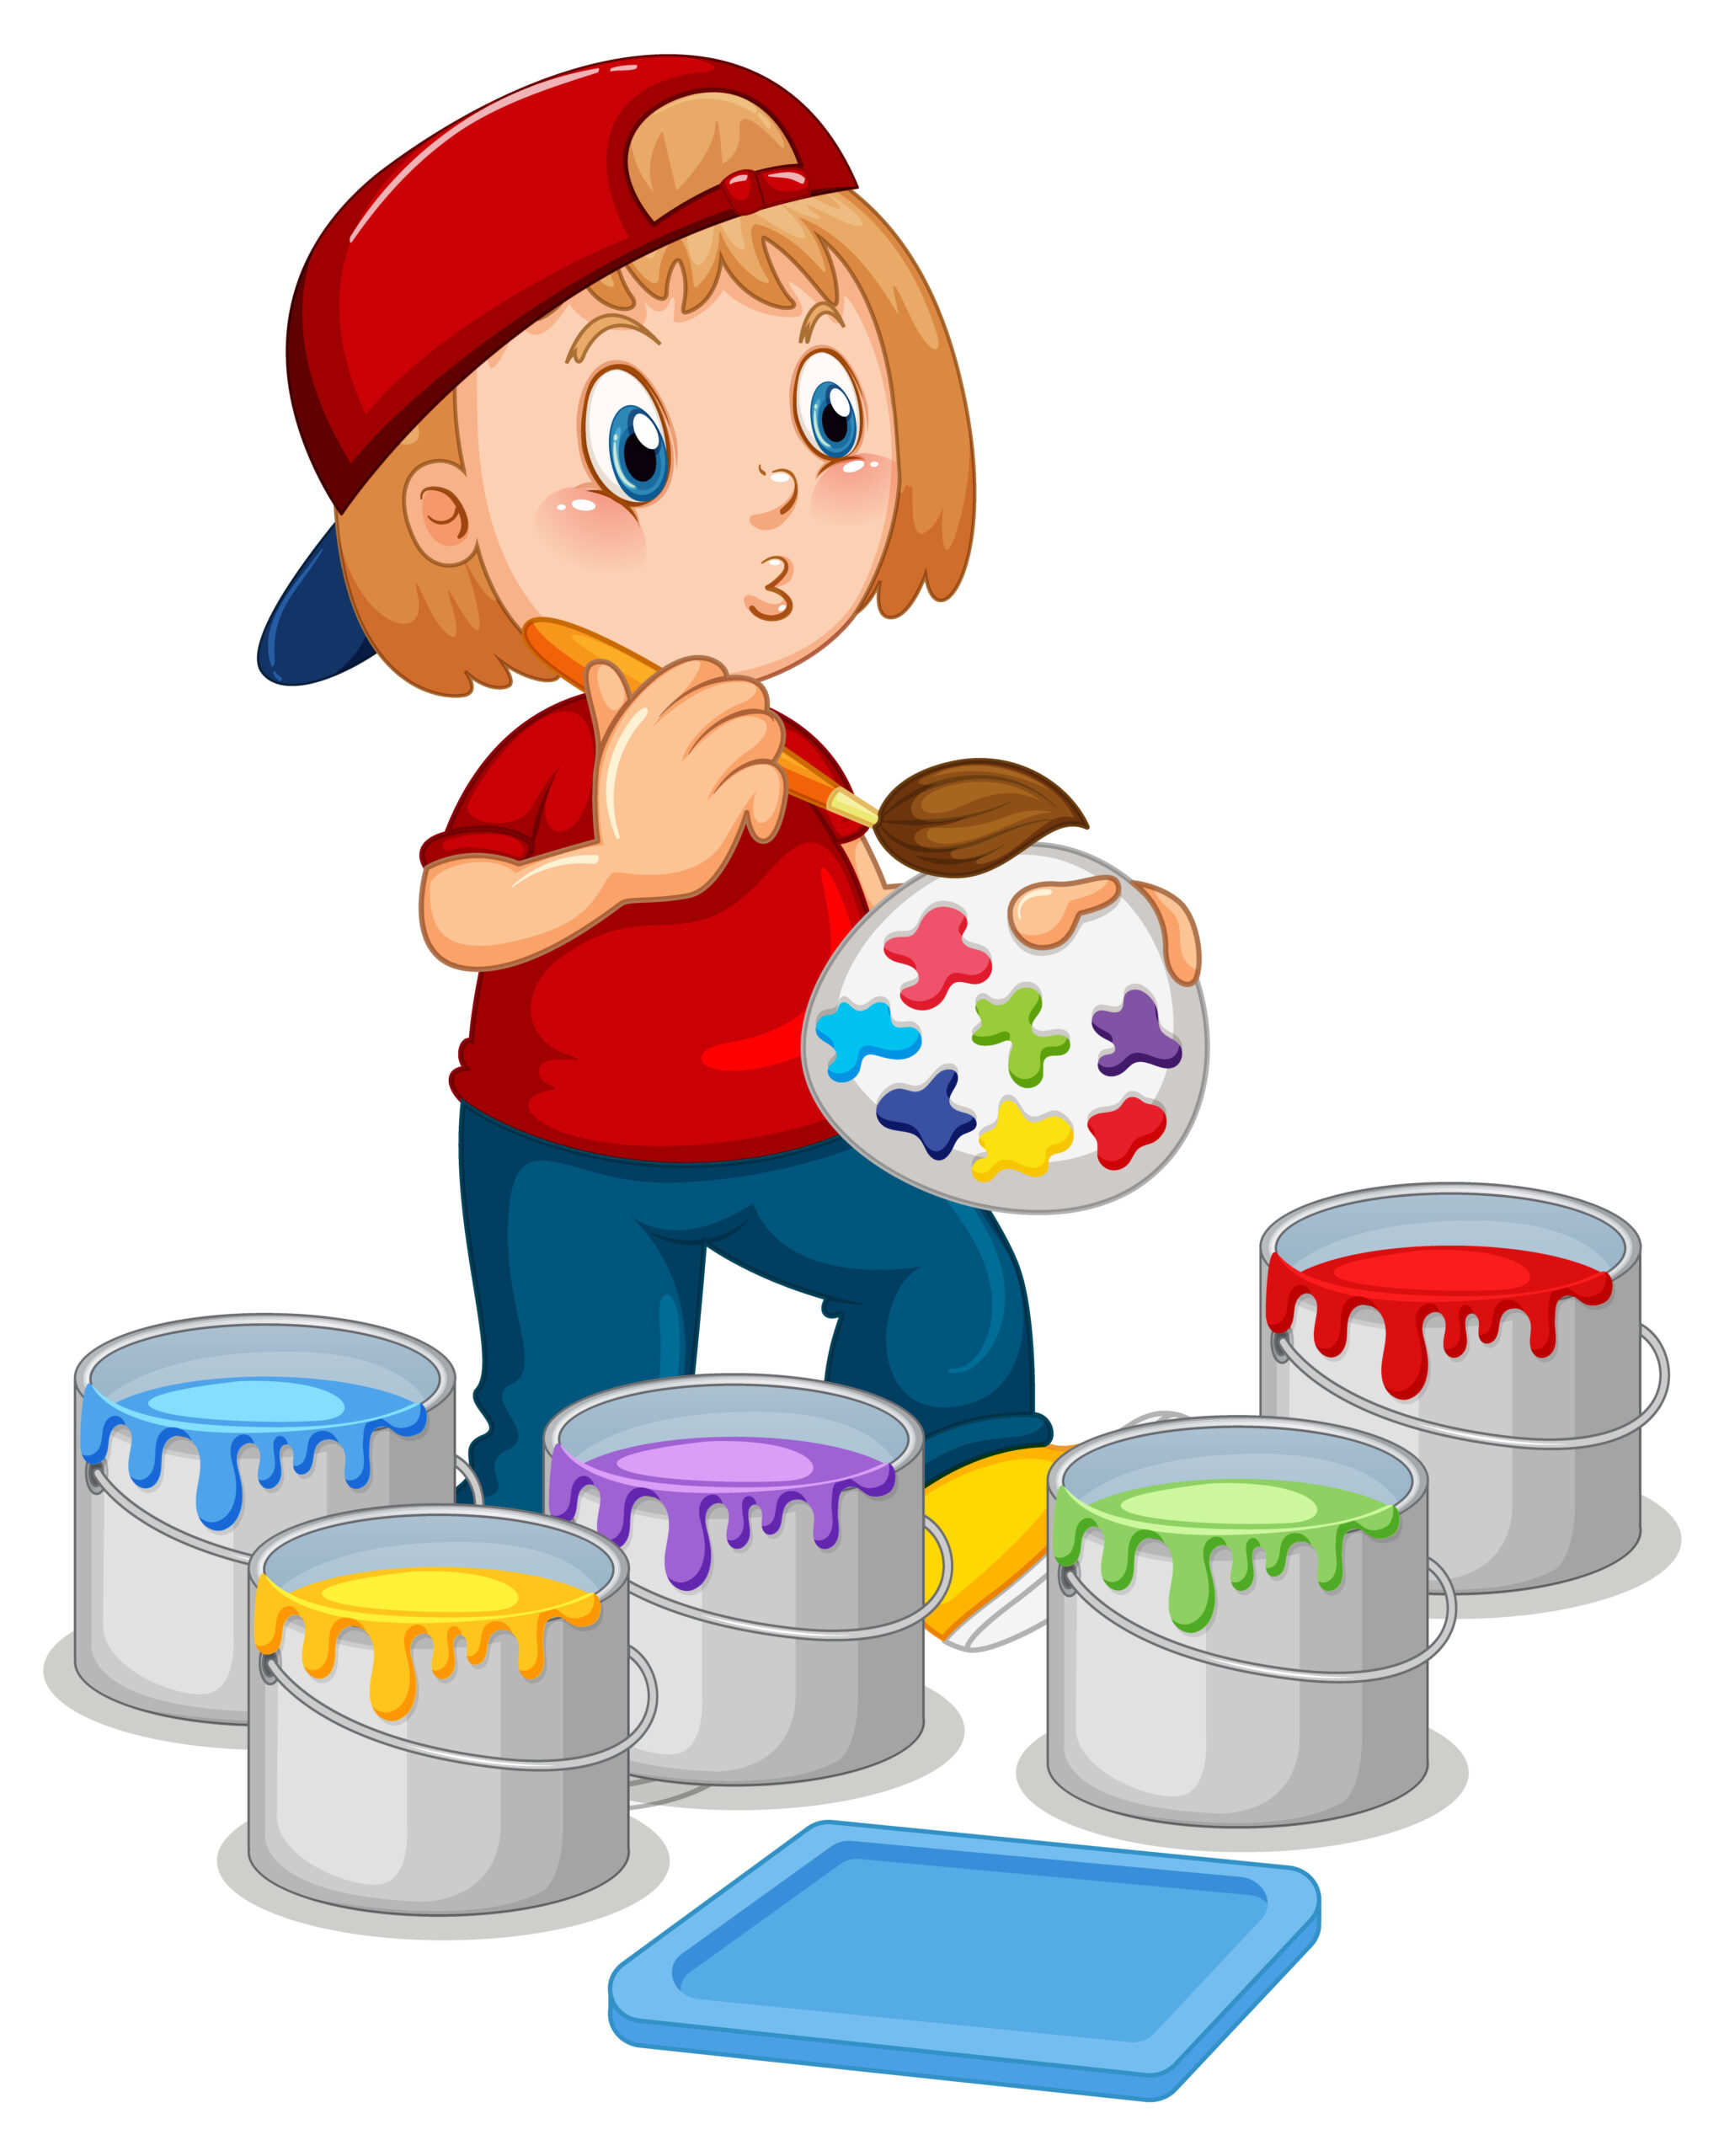 Little girl with buckets of paints illustration